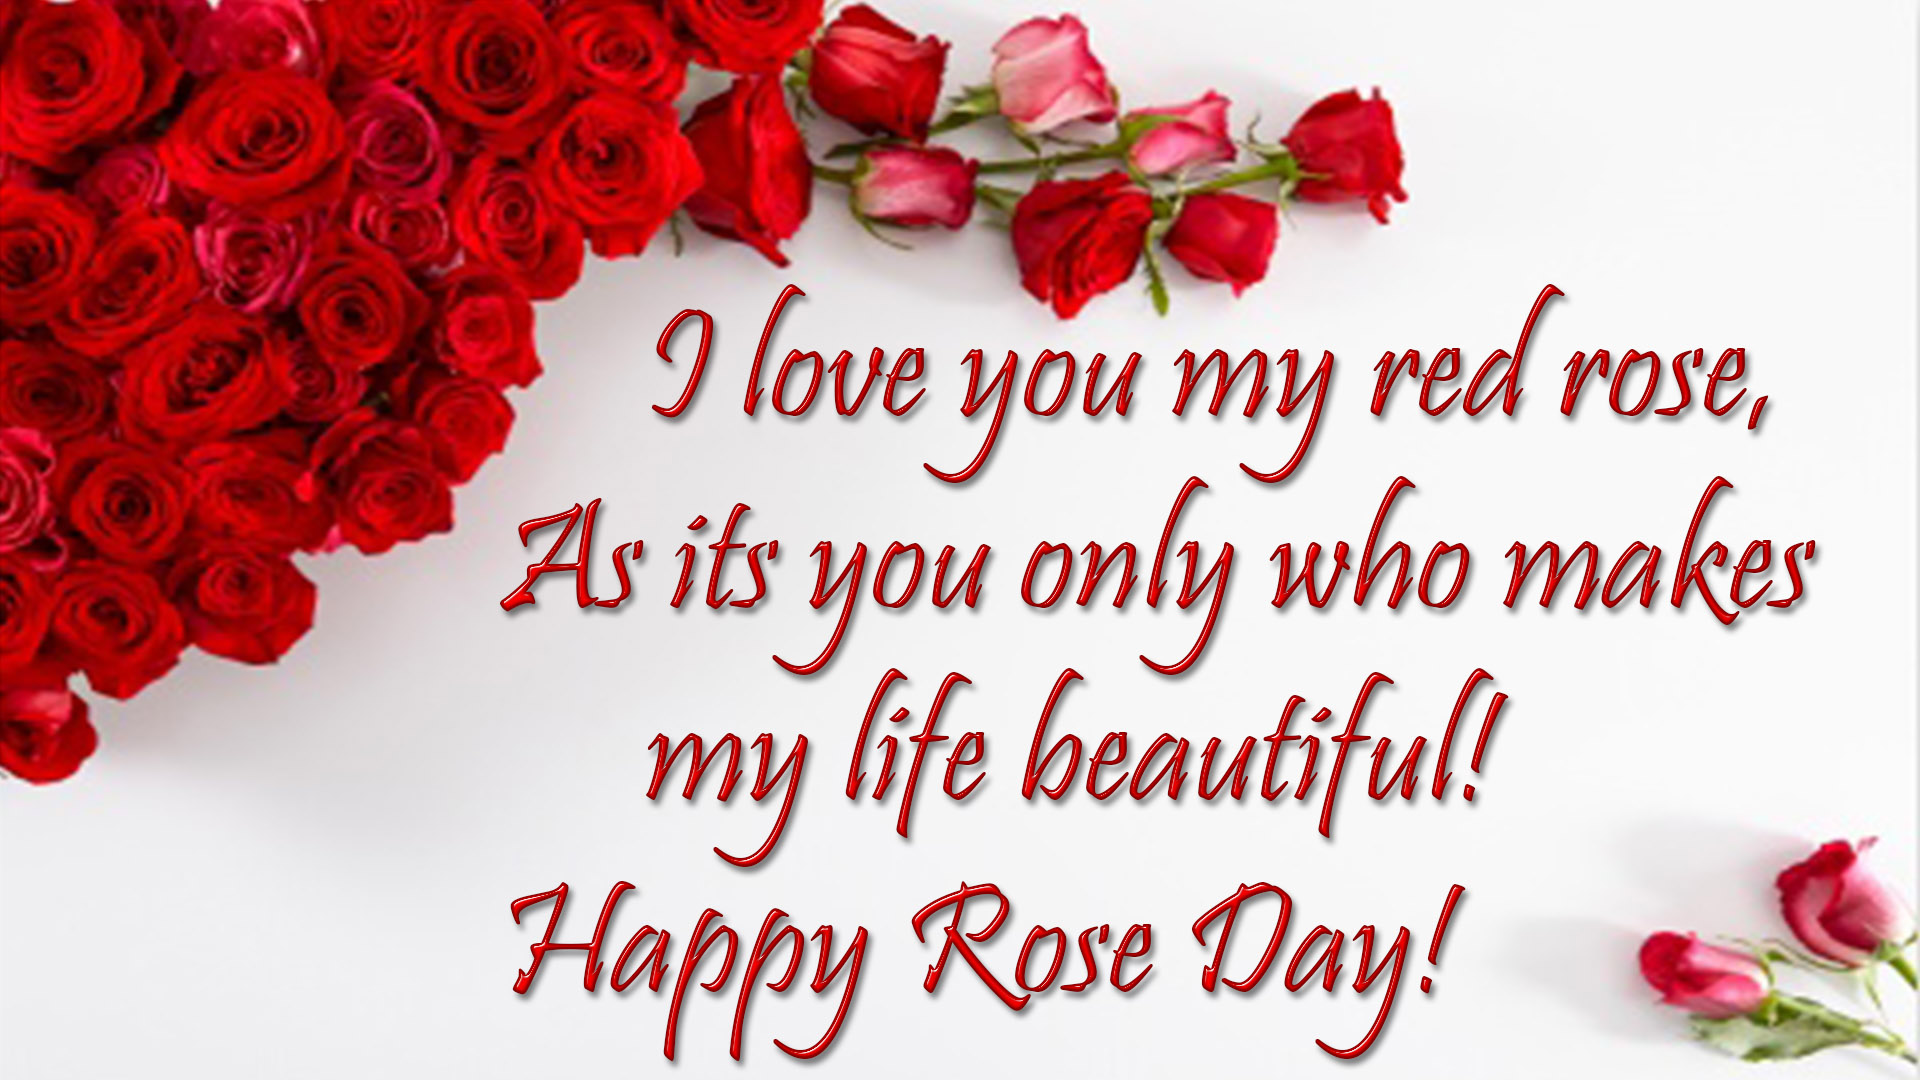 rose day wishes hd image